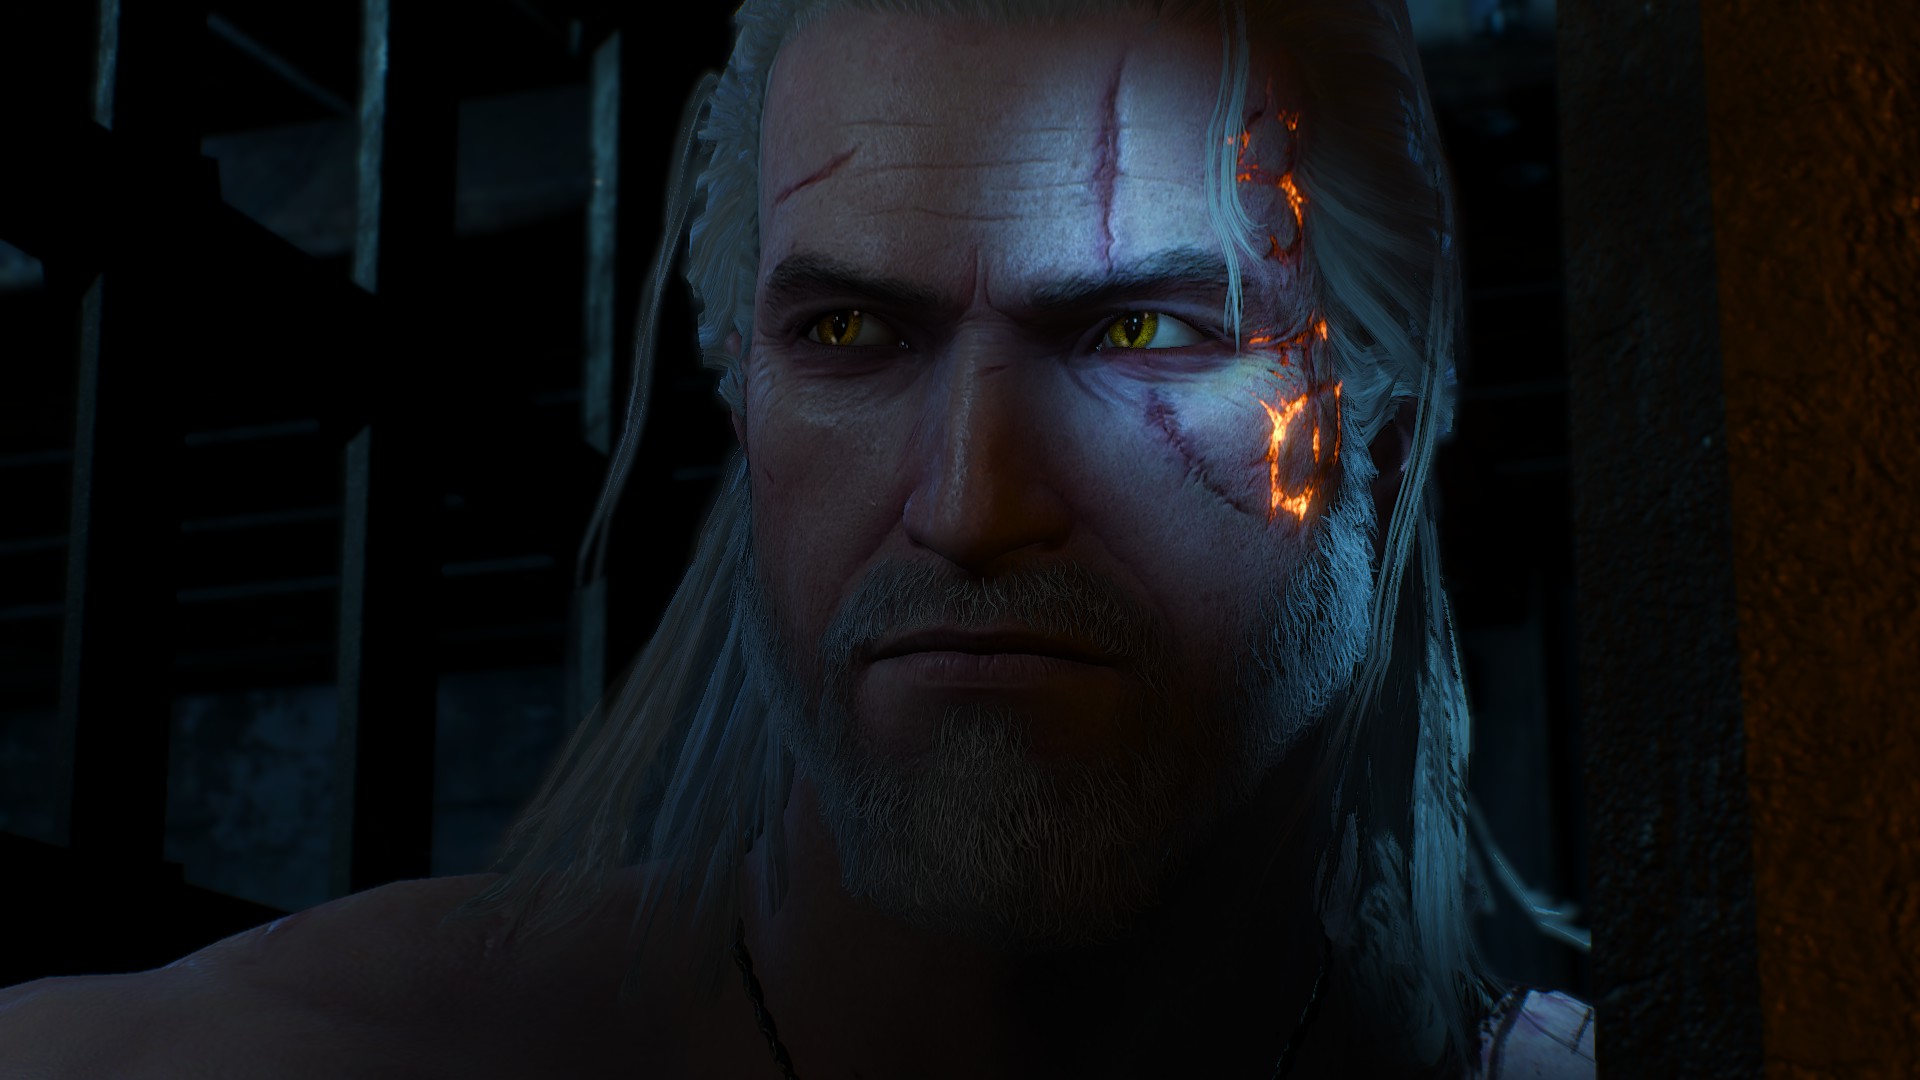 General 1920x1080 The Witcher Geralt of Rivia video game characters screen shot The Witcher 3: Wild Hunt